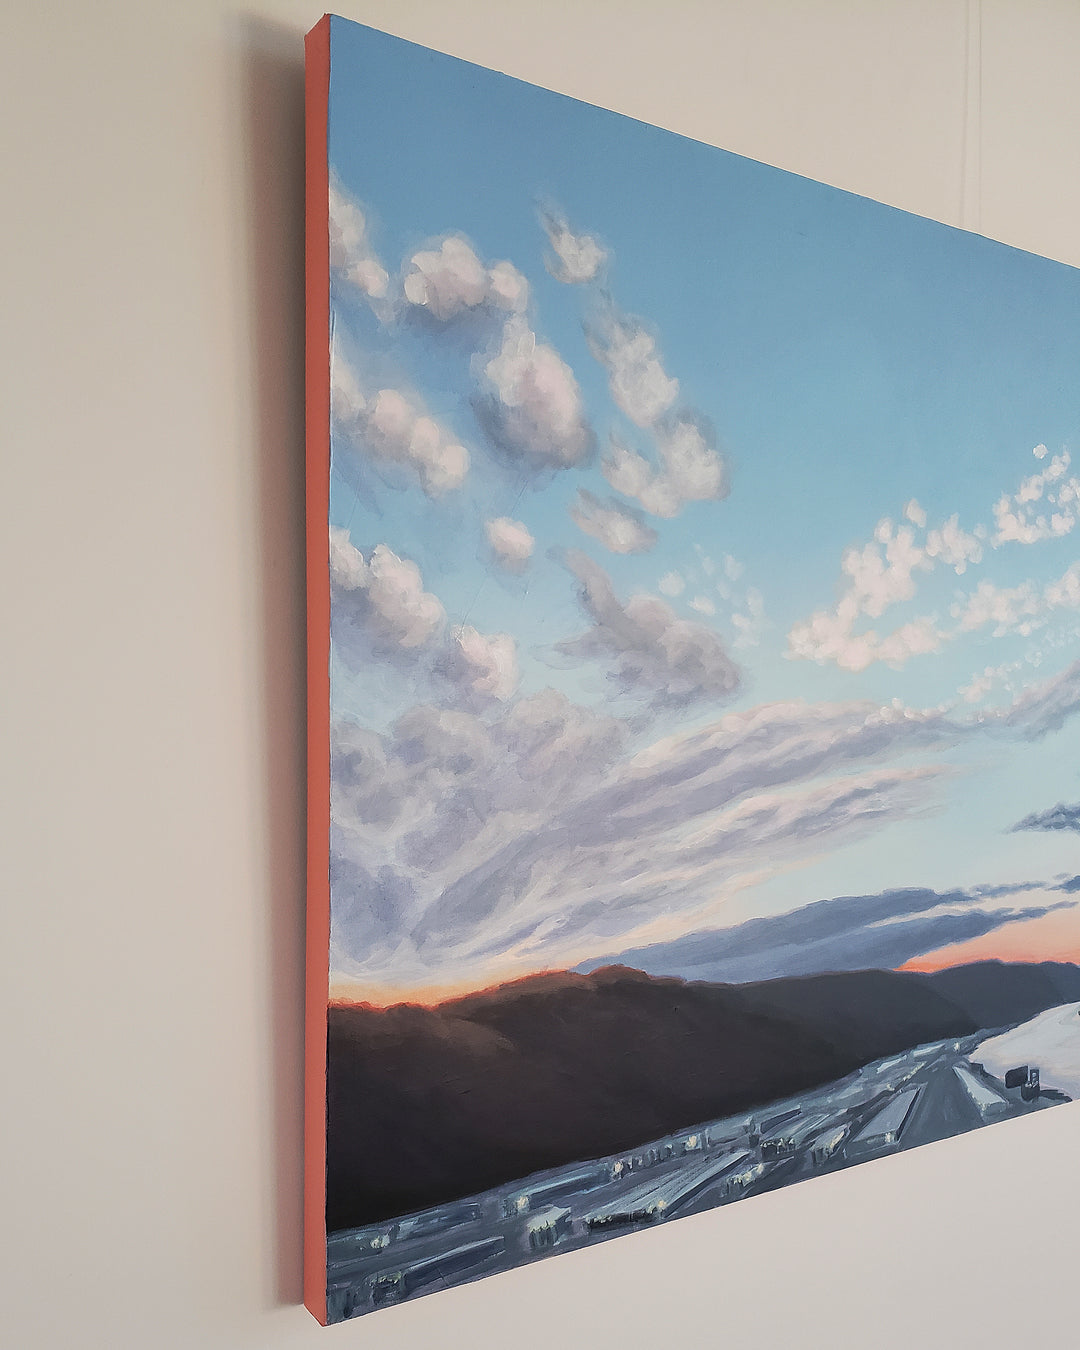 New Year's Day Over Portland - 60"x36"